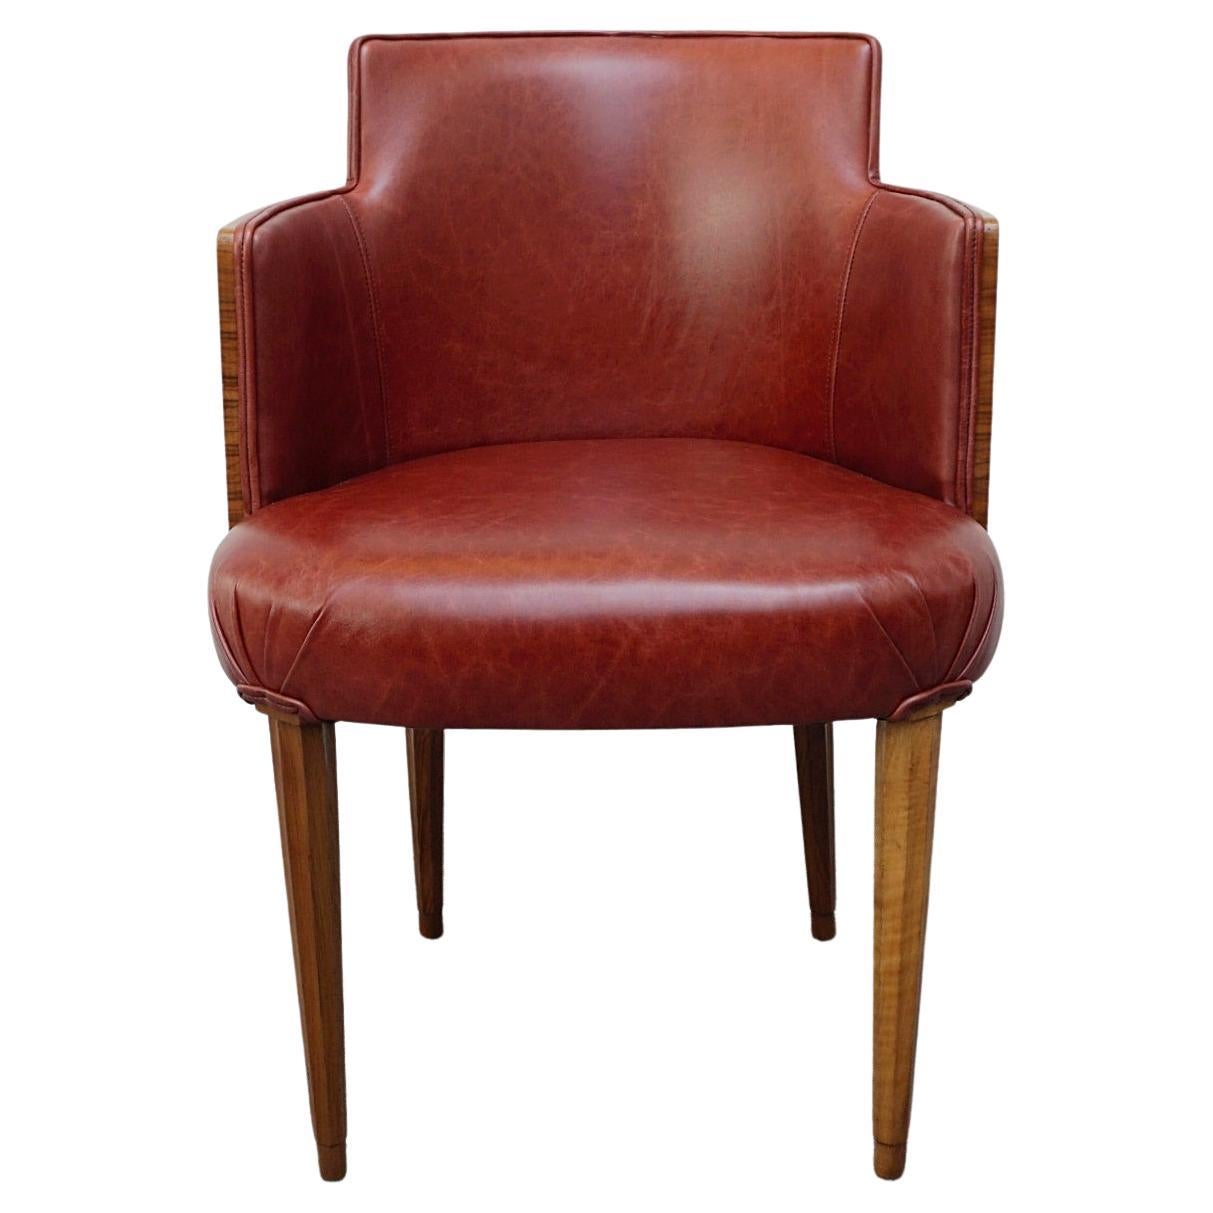 Art Deco Tub/ Desk Chair Reupholstered in Red Leather